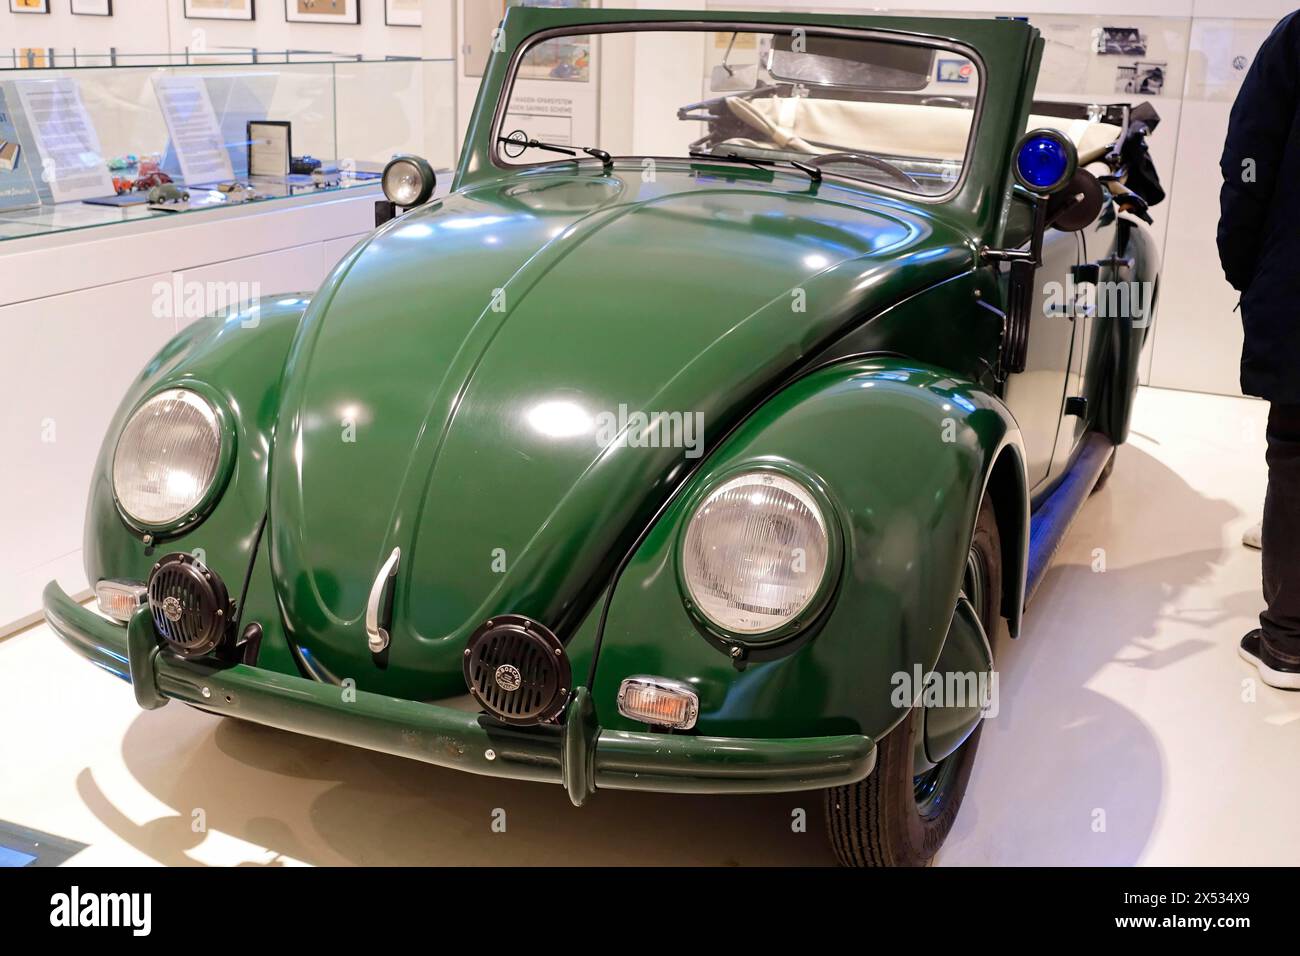 A green Volkswagen Beetle Cabriolet in shiny condition stands in the museum, AUTOMUSEUM PROTOTYP, Hamburg, Hanseatic City of Hamburg, Germany Europe Stock Photo